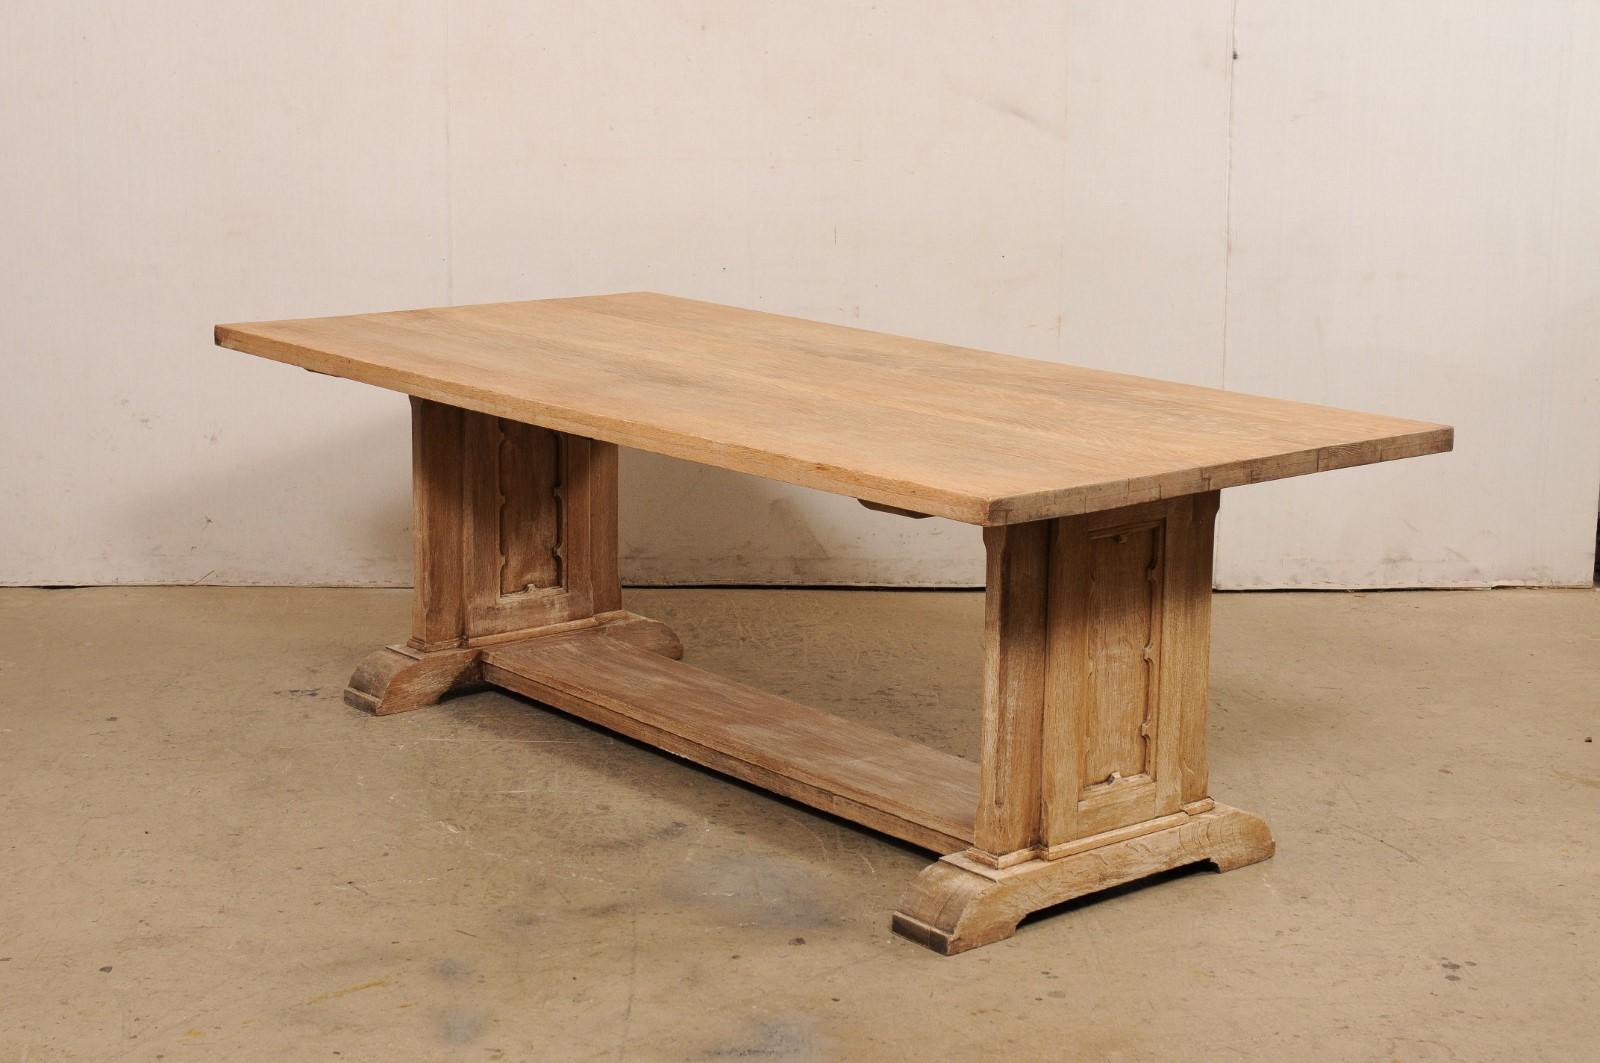 French 7 Ft Long Bleached Wood Dining Table w/Trestle Legs, 1920's For Sale 4